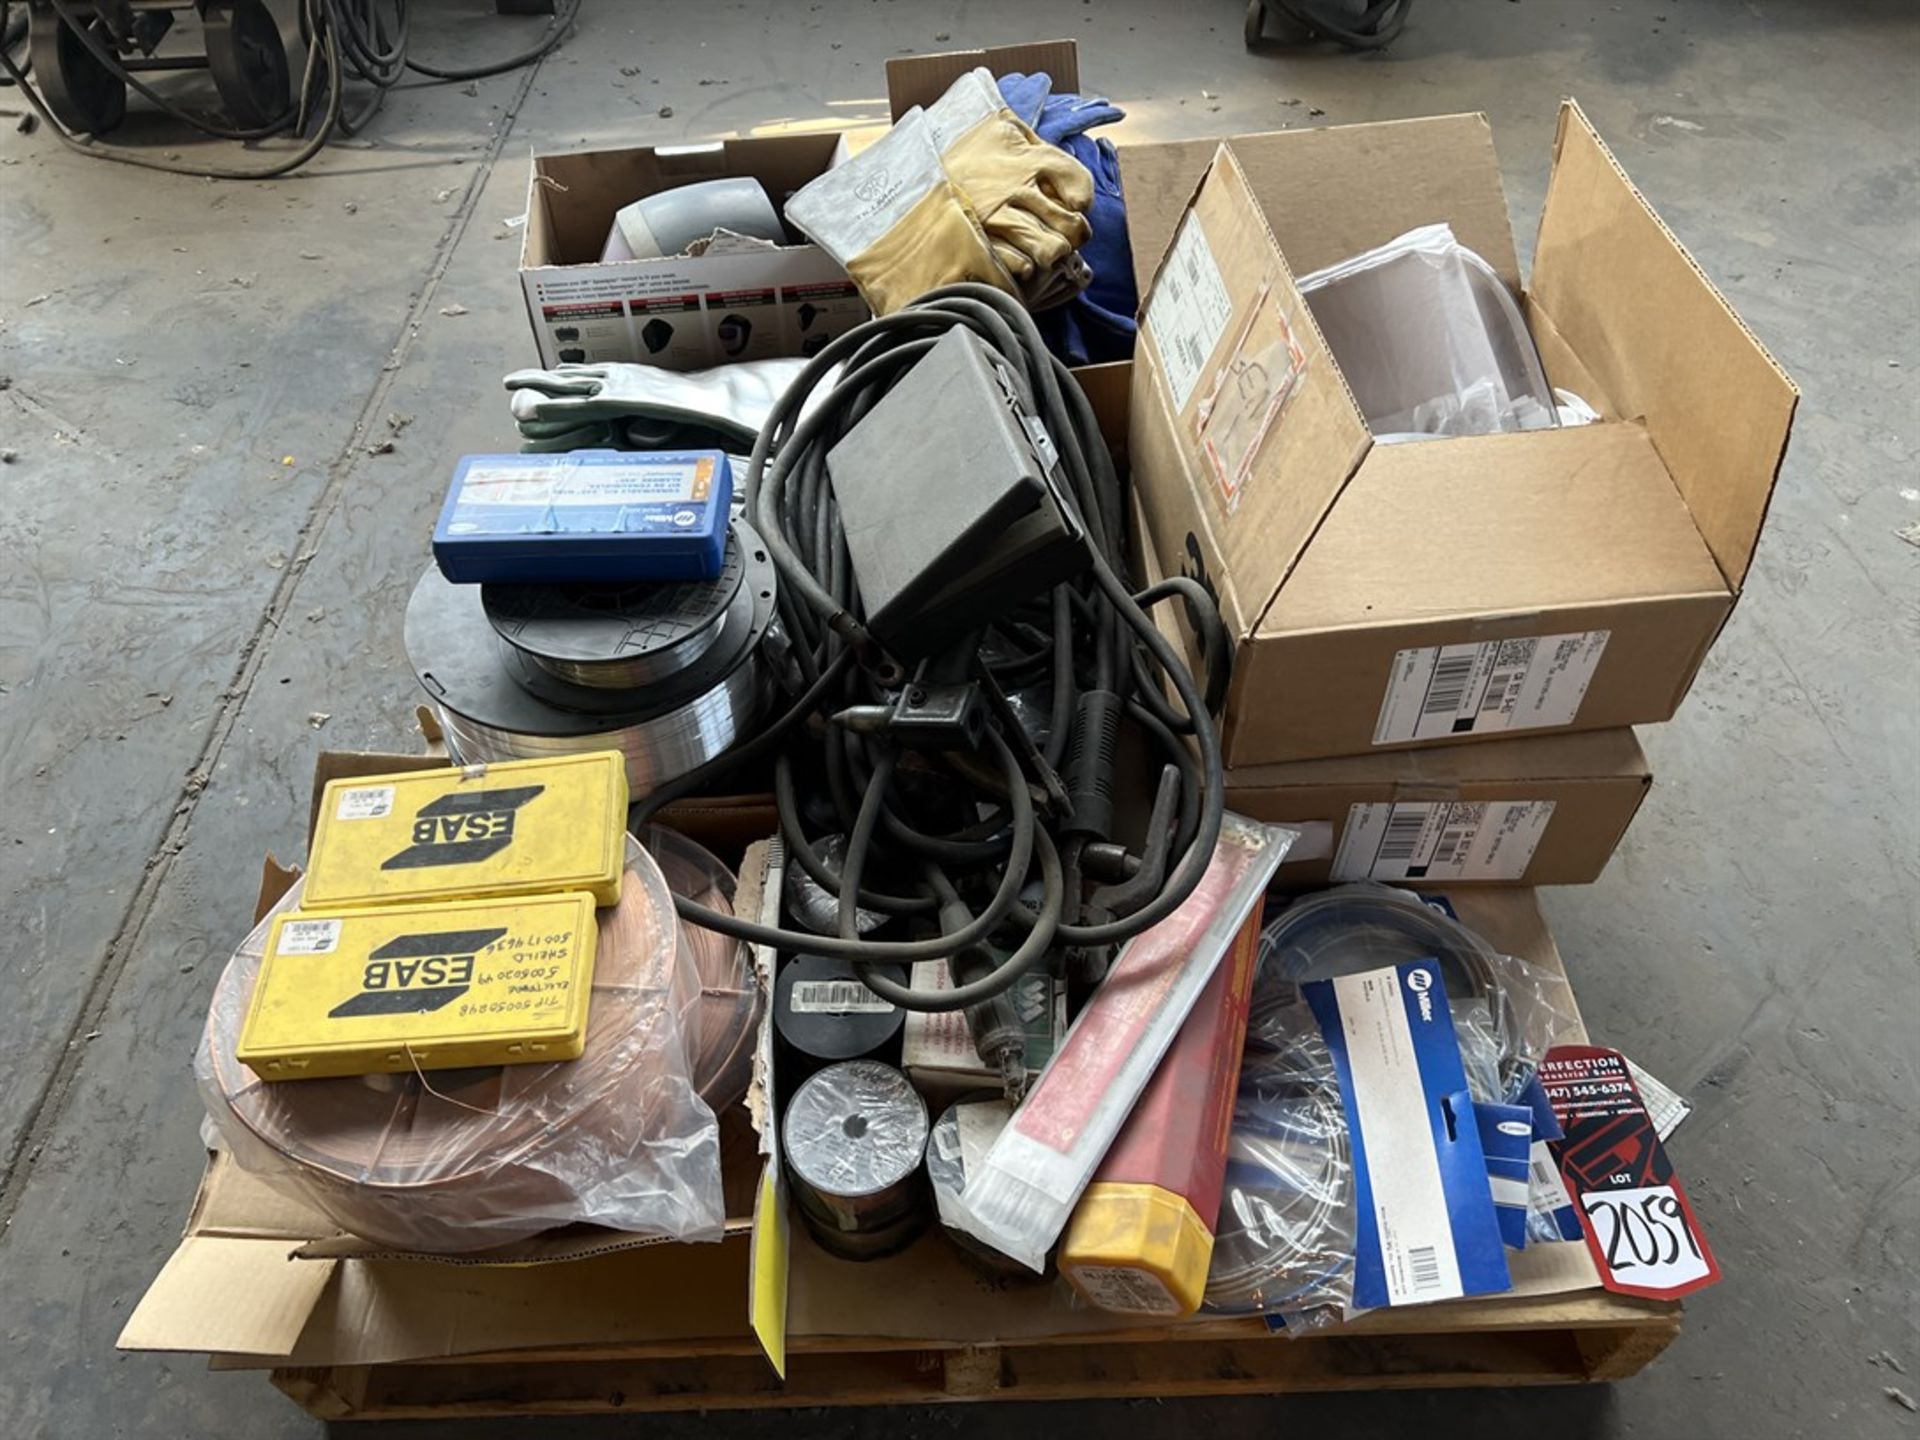 Lot of Welding Wire, Welding Gloves, Masks, Ground Cables, Gun Cords and Tips